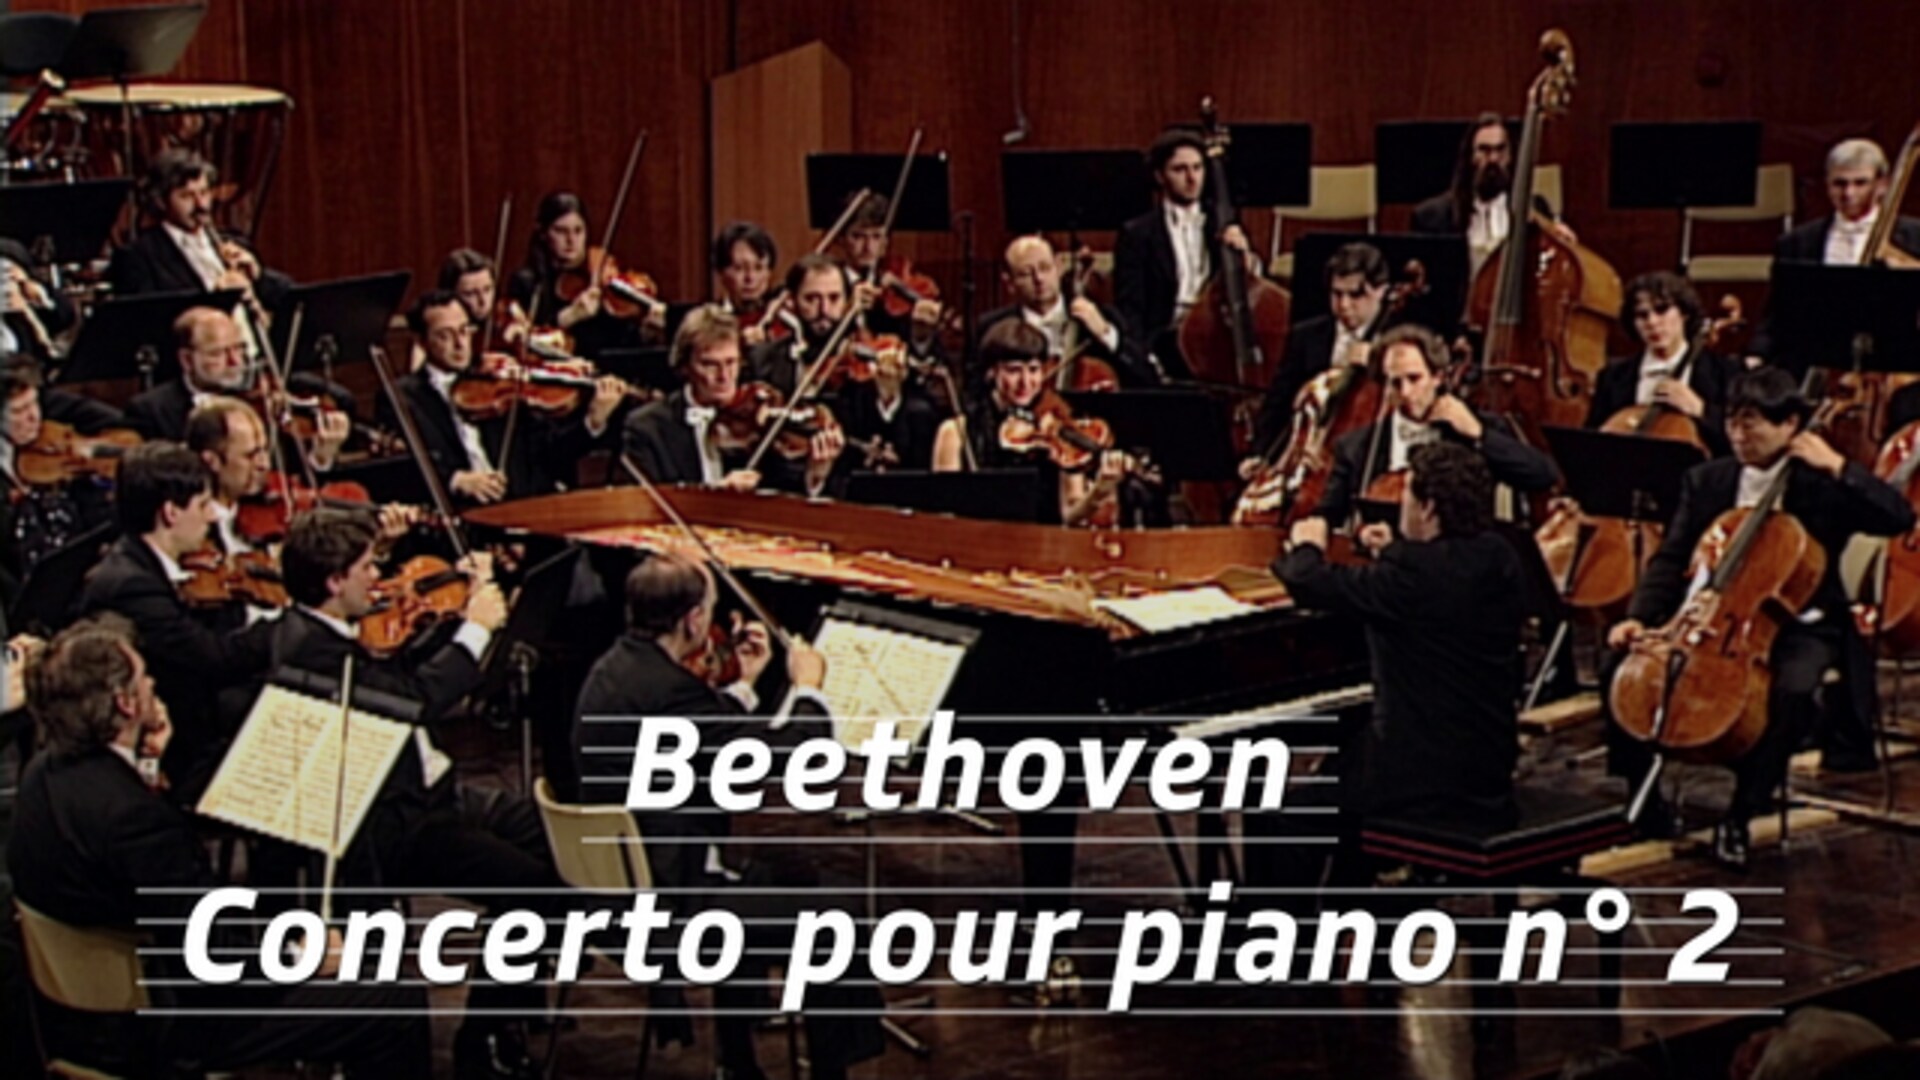 Beethoven - Concerto pour piano n° 2